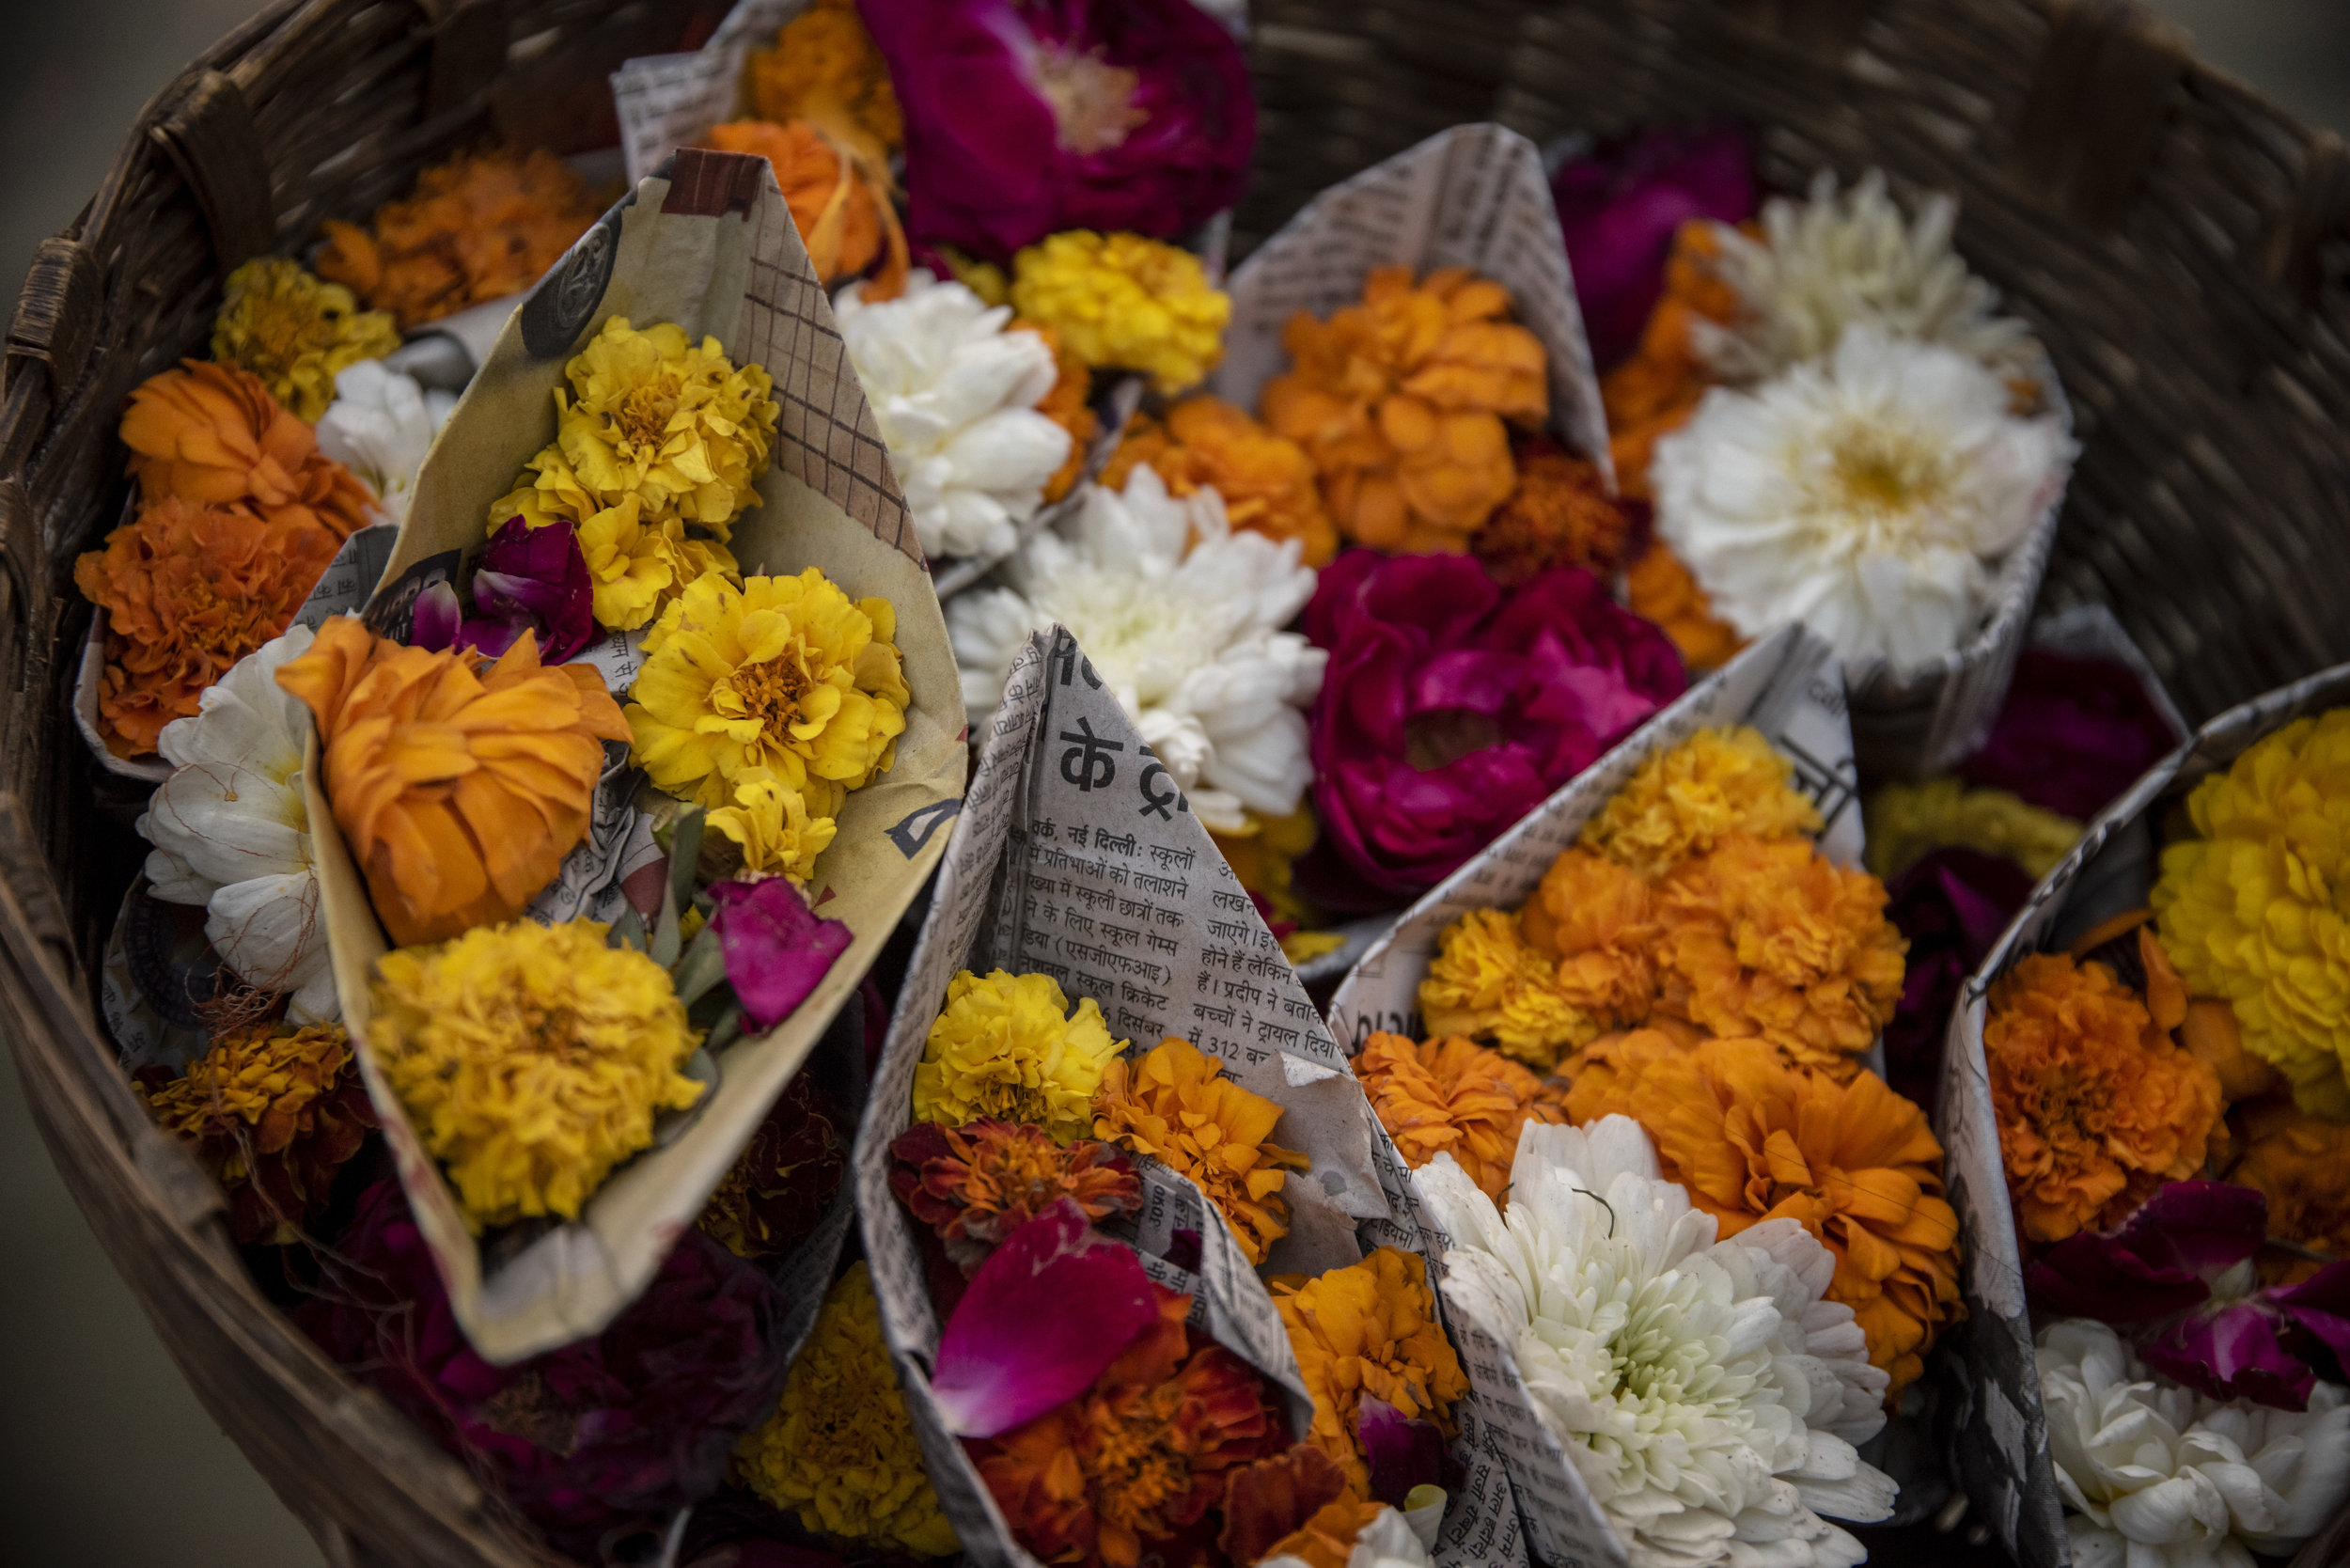  Flowers are sold along the shoreline as puja offerings to the Gods. 